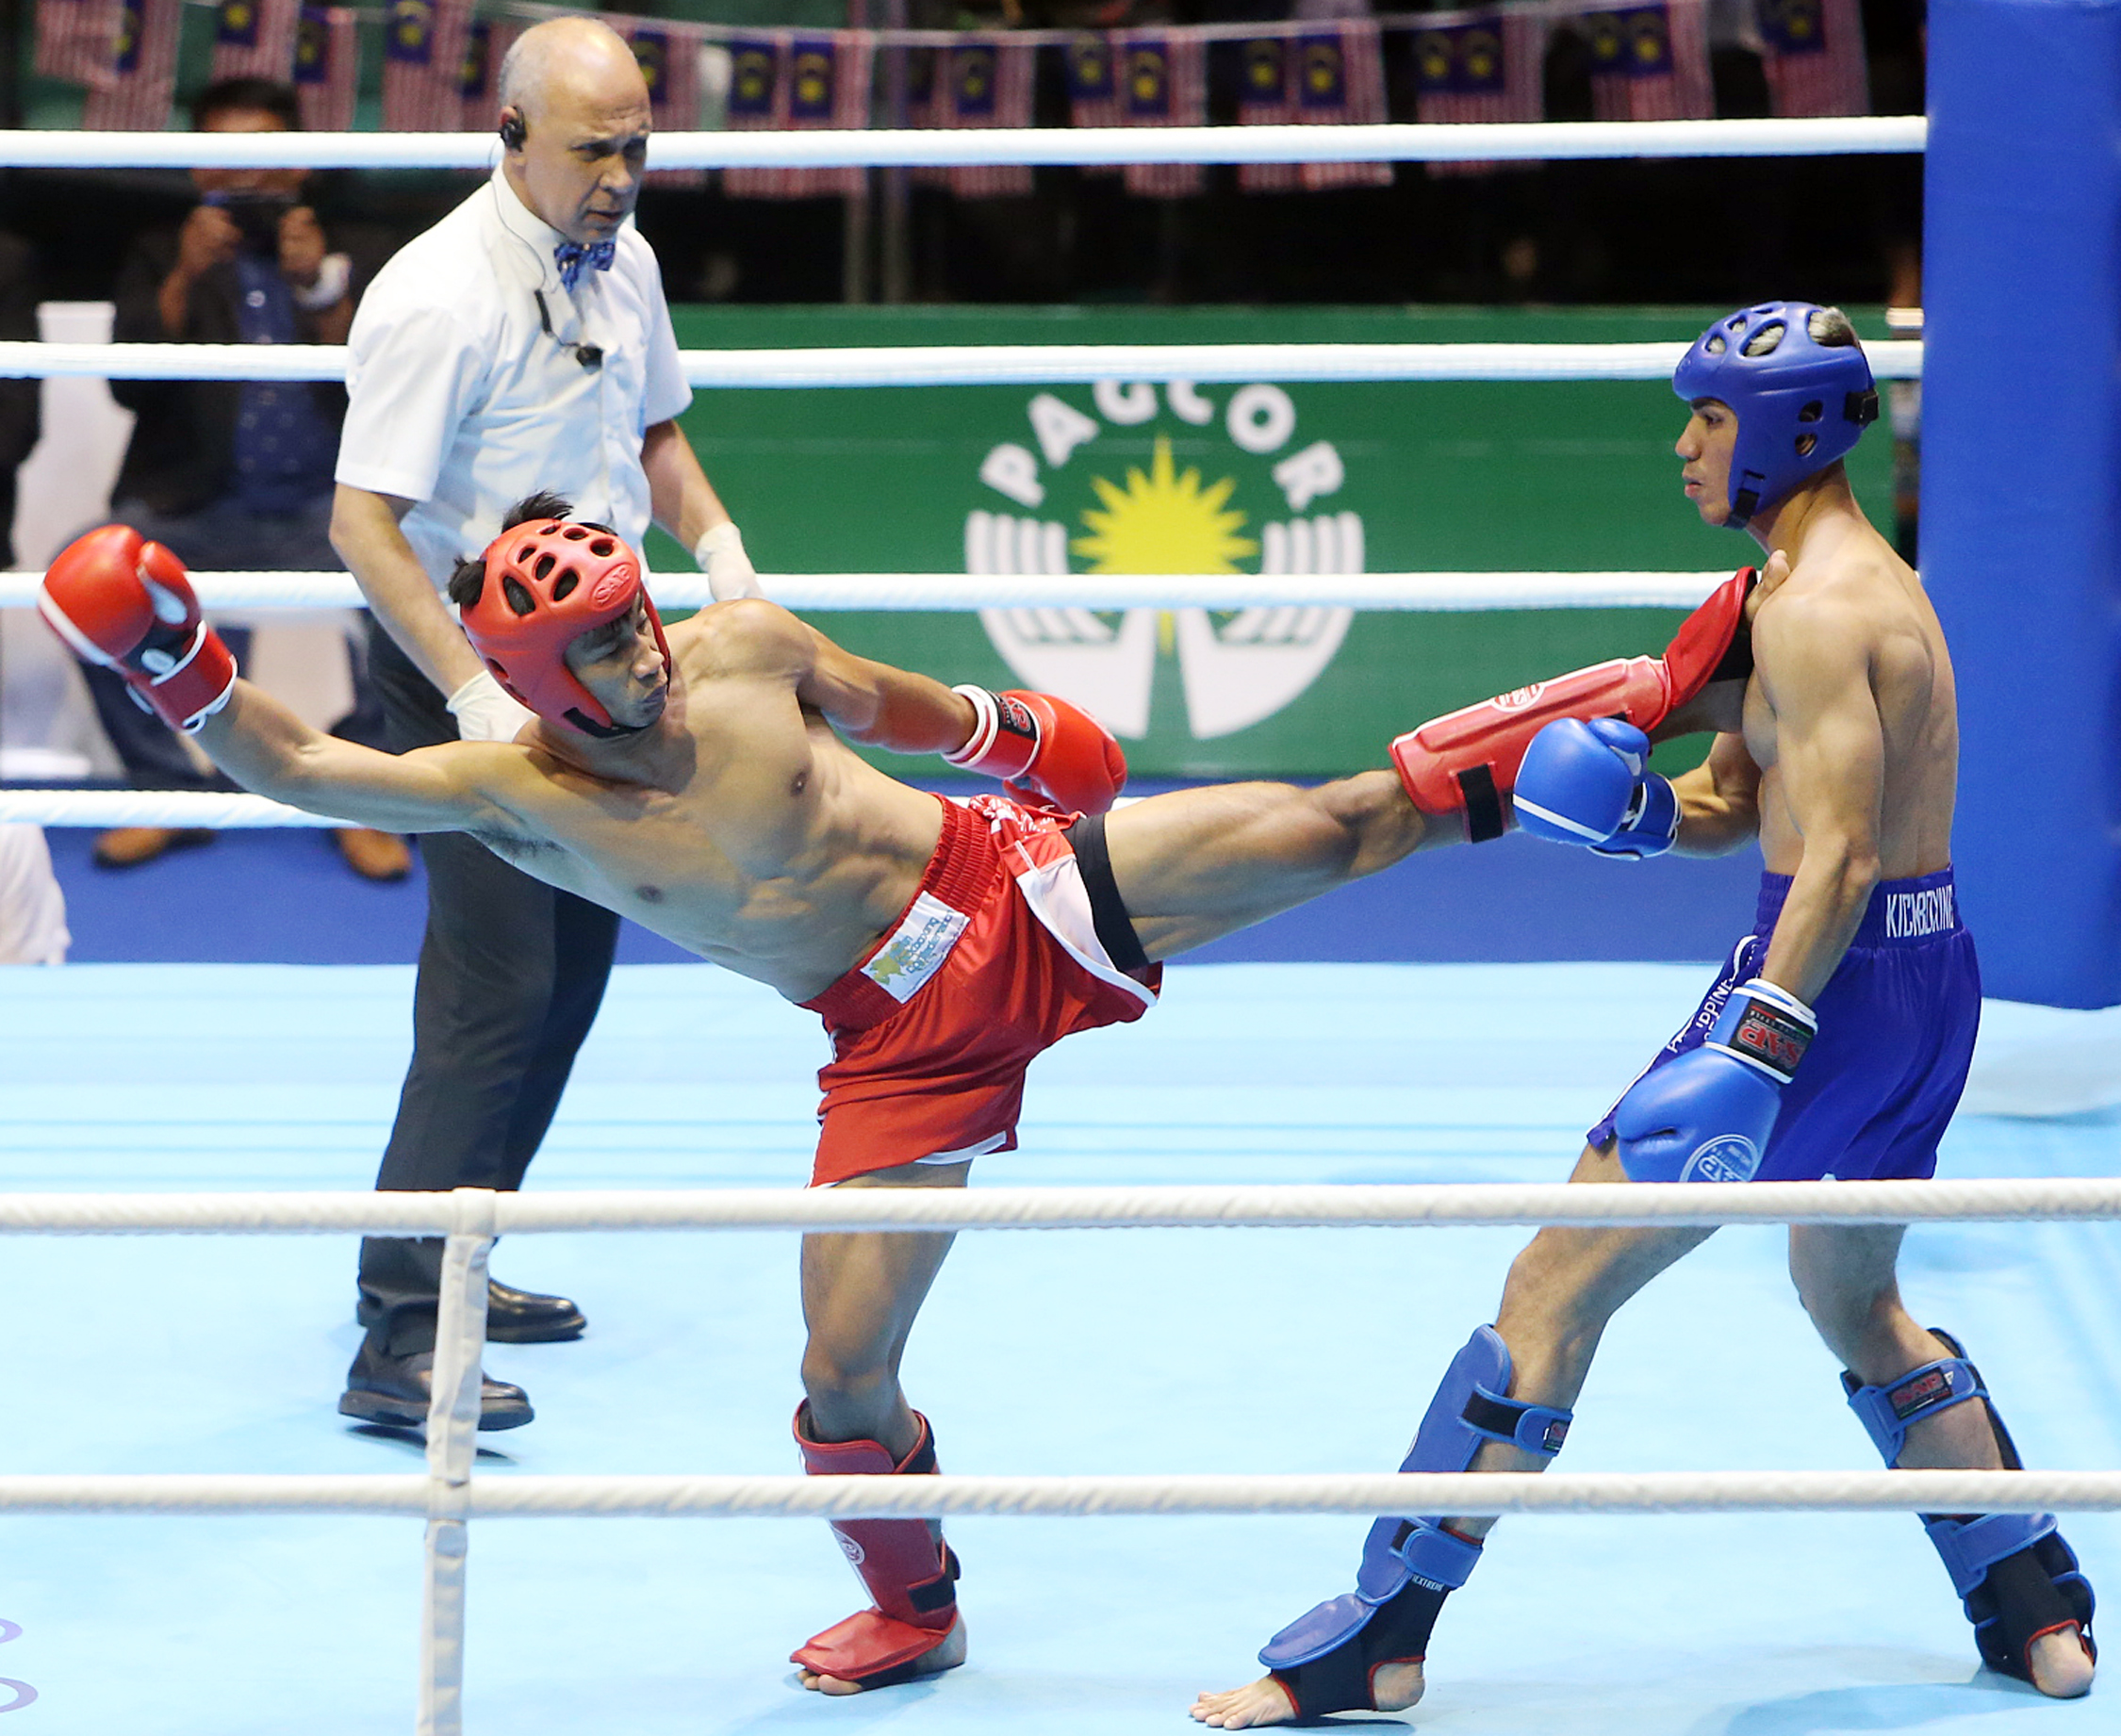 Jean-Calwood Saclog (red) of the Philippines delivers a left kick to the chest of his opponent Muhammad Mahmood (blue) of Malaysia during their kickboxing match at the Cuneta Astrodome on December 10, 2019.  Saclag went on to win the gold medal.  Edwin Bekasmas